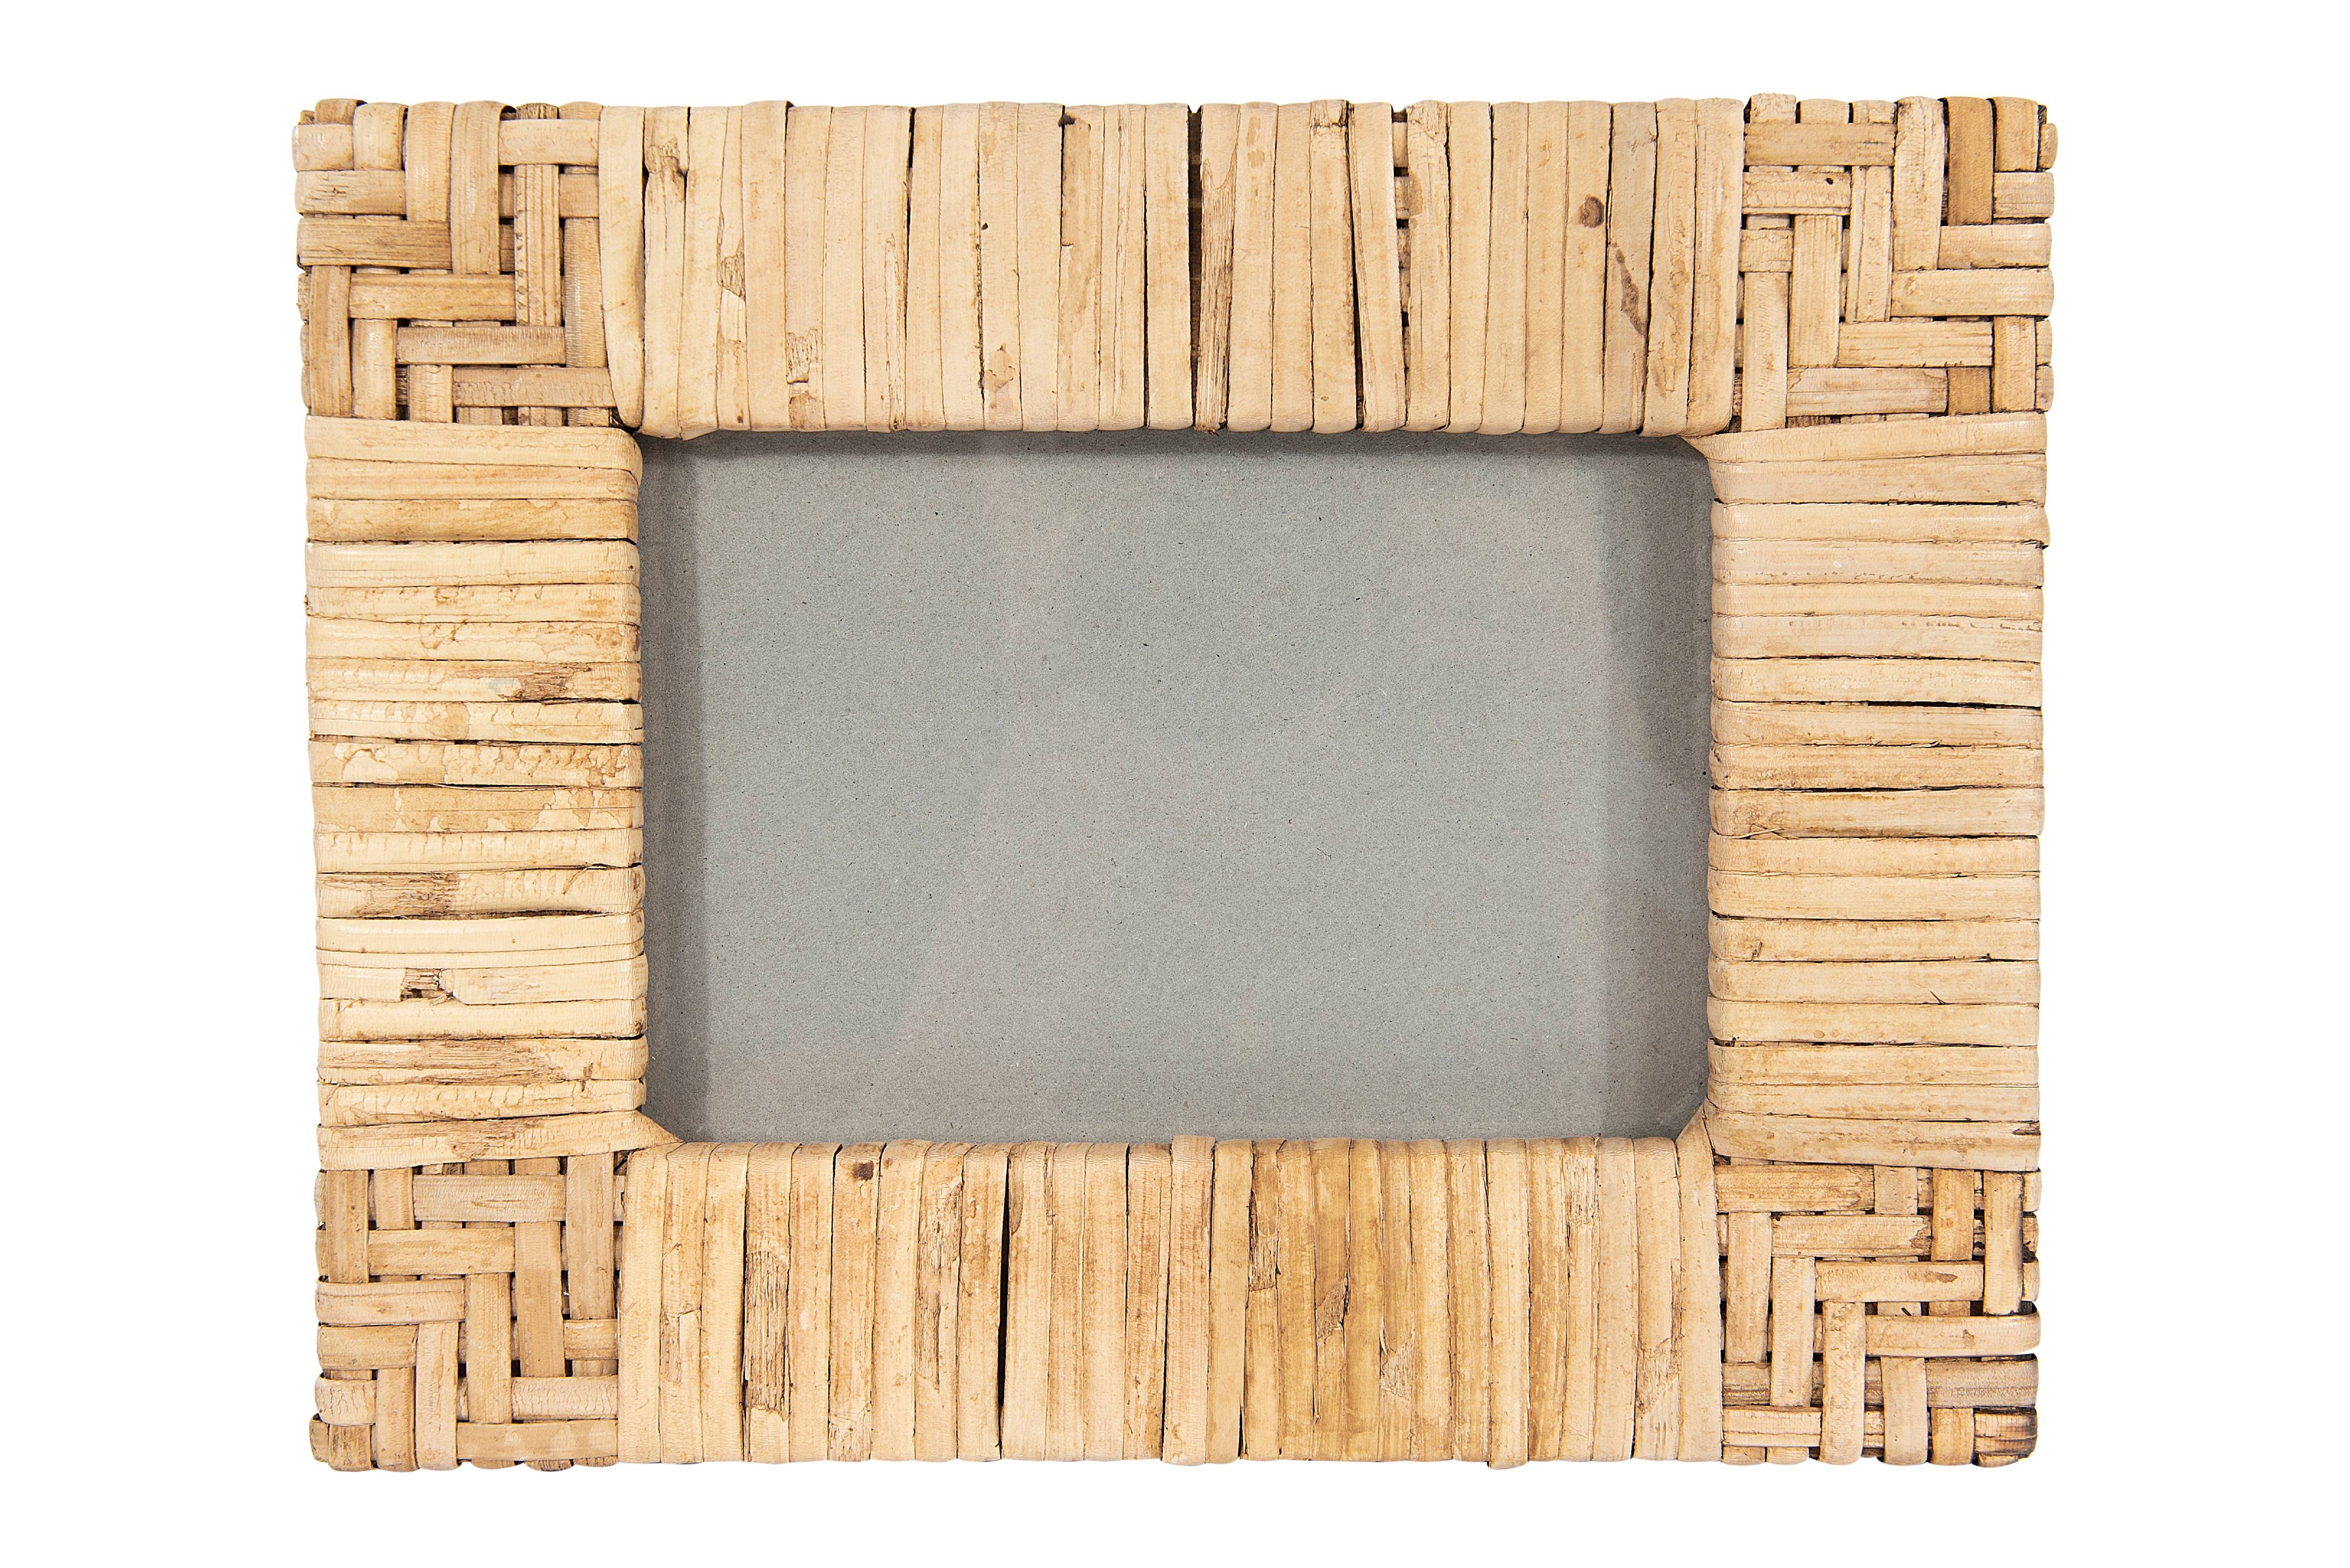 Handwoven Rattan Photo Frame, Holds 4" x 6" Photo - Nomad Home